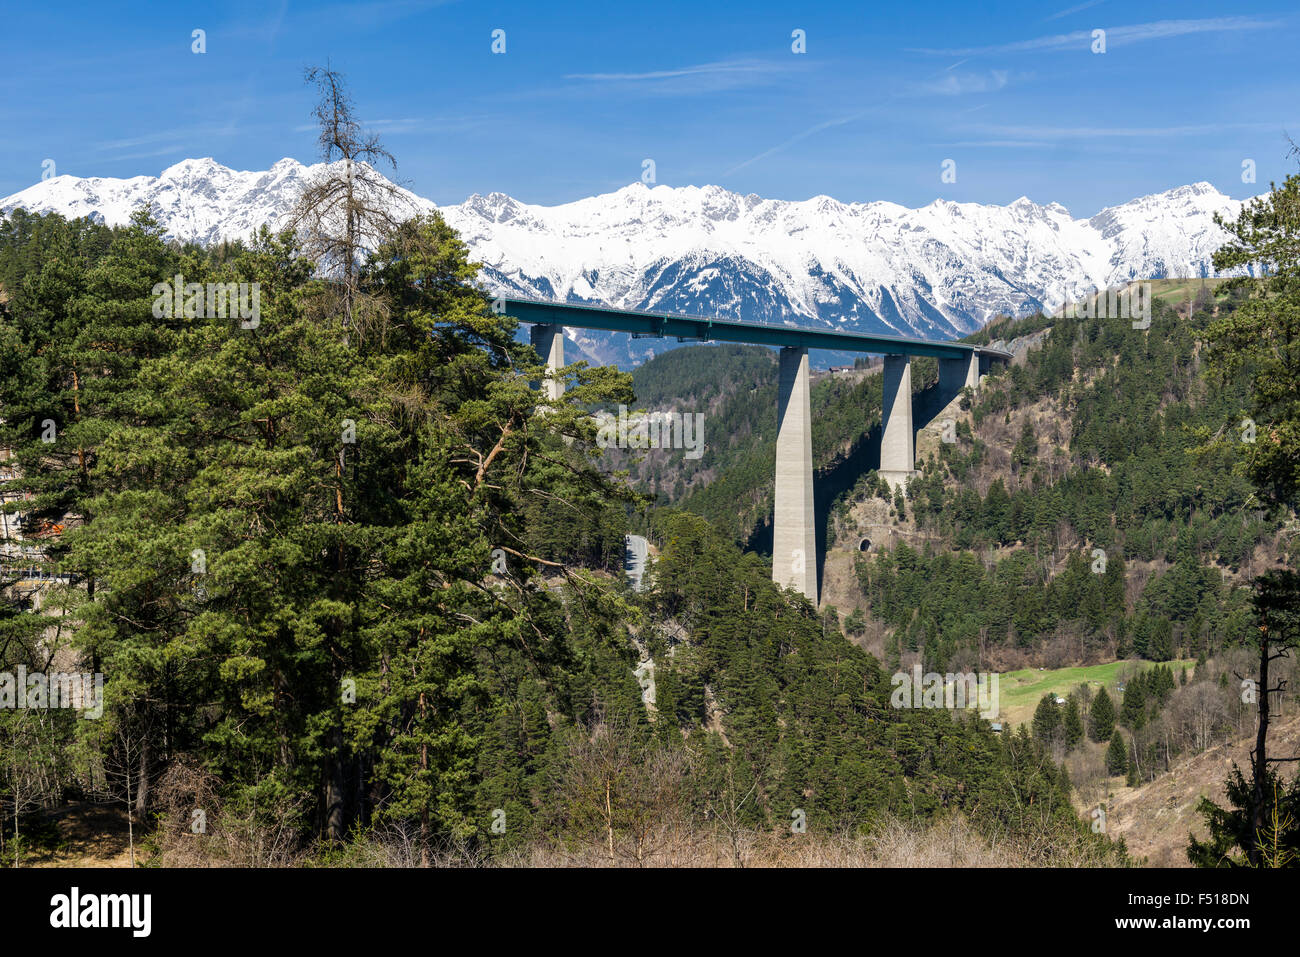 The bridge Europabrücke seen from the Brenner road, snow capped mountains in the distance Stock Photo